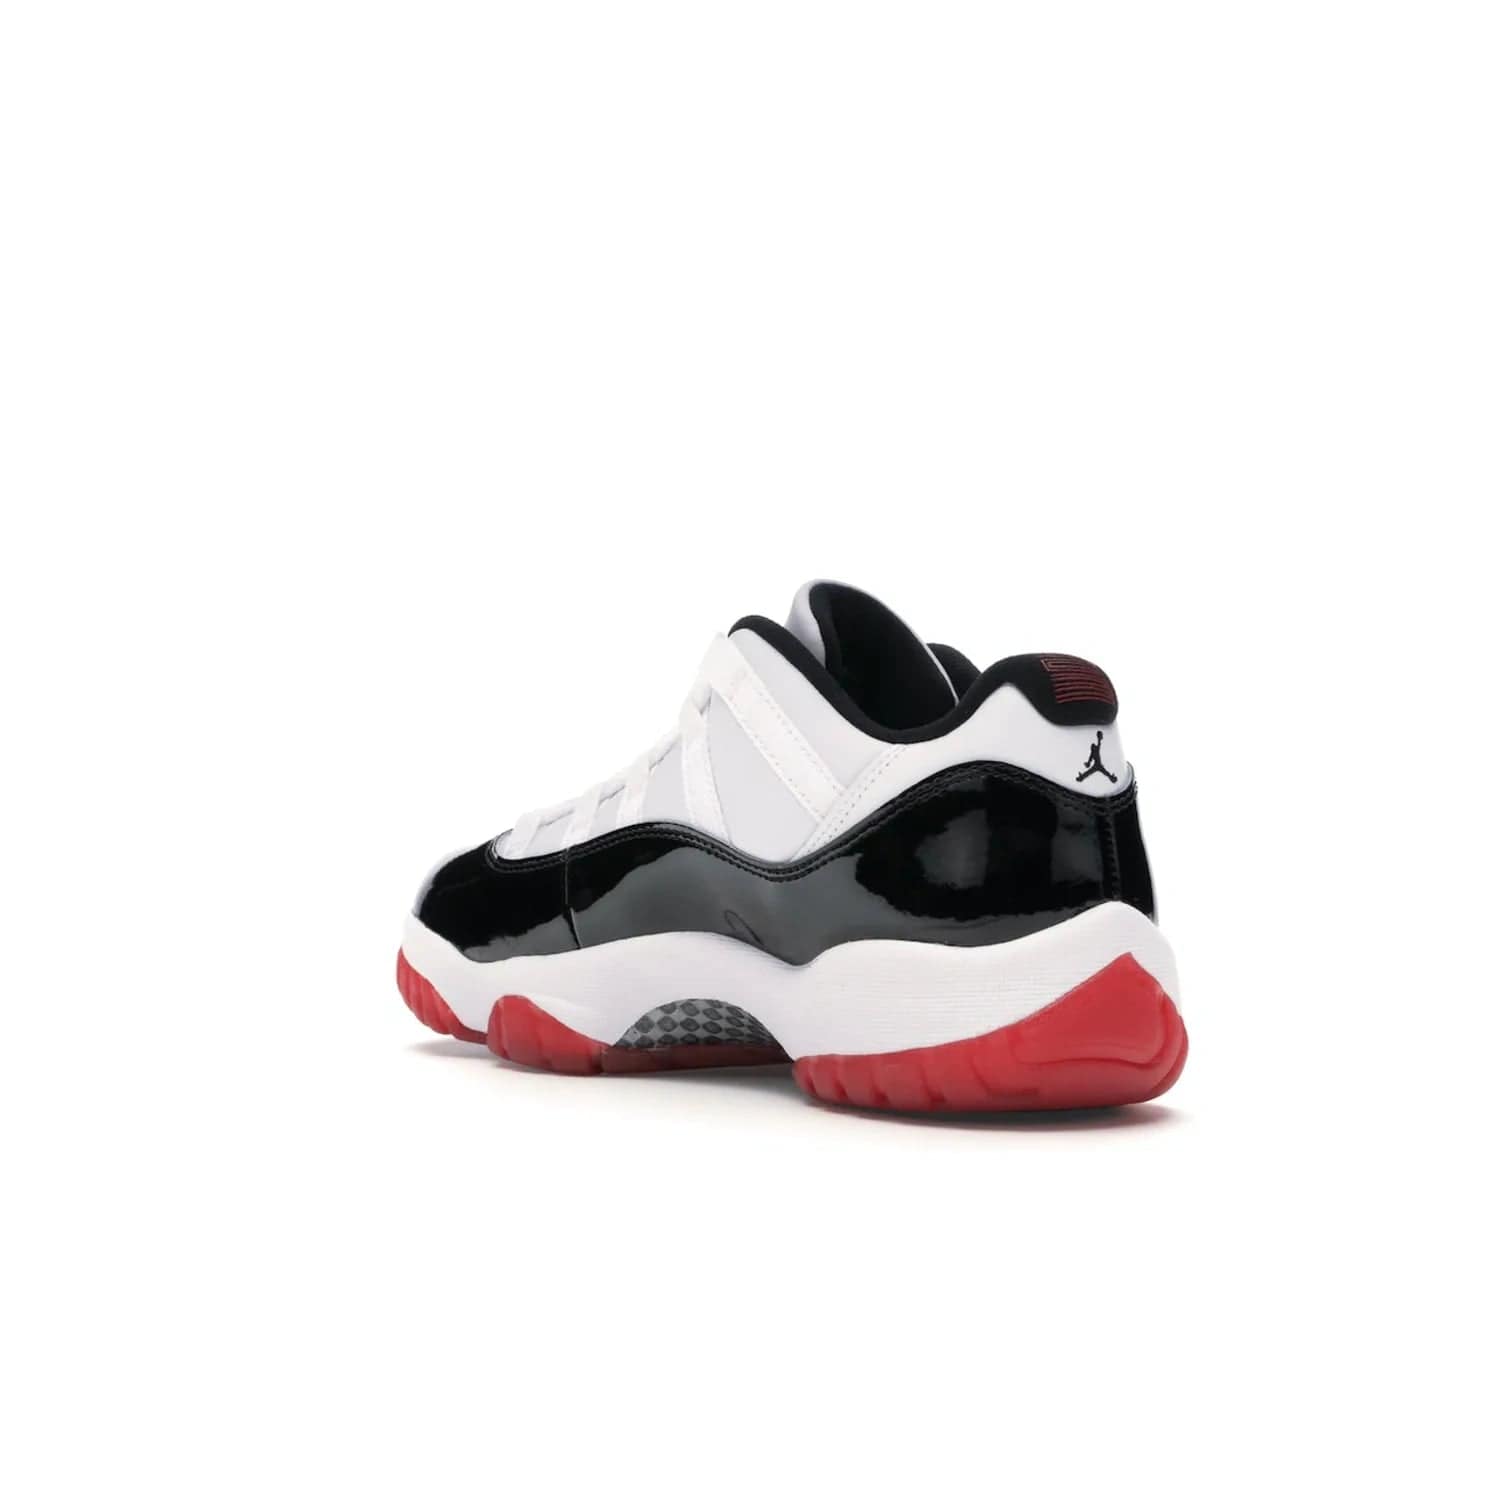 Jordan 11 Retro Low Concord Bred - Image 24 - Only at www.BallersClubKickz.com - Grab the classic Jordan 11 look with the Jordan 11 Retro Low Concord Bred. With white and black elements and the iconic red outsole of the Jordan 11 Bred, you won't miss a beat. Released in June 2020, the perfect complement to any outfit.